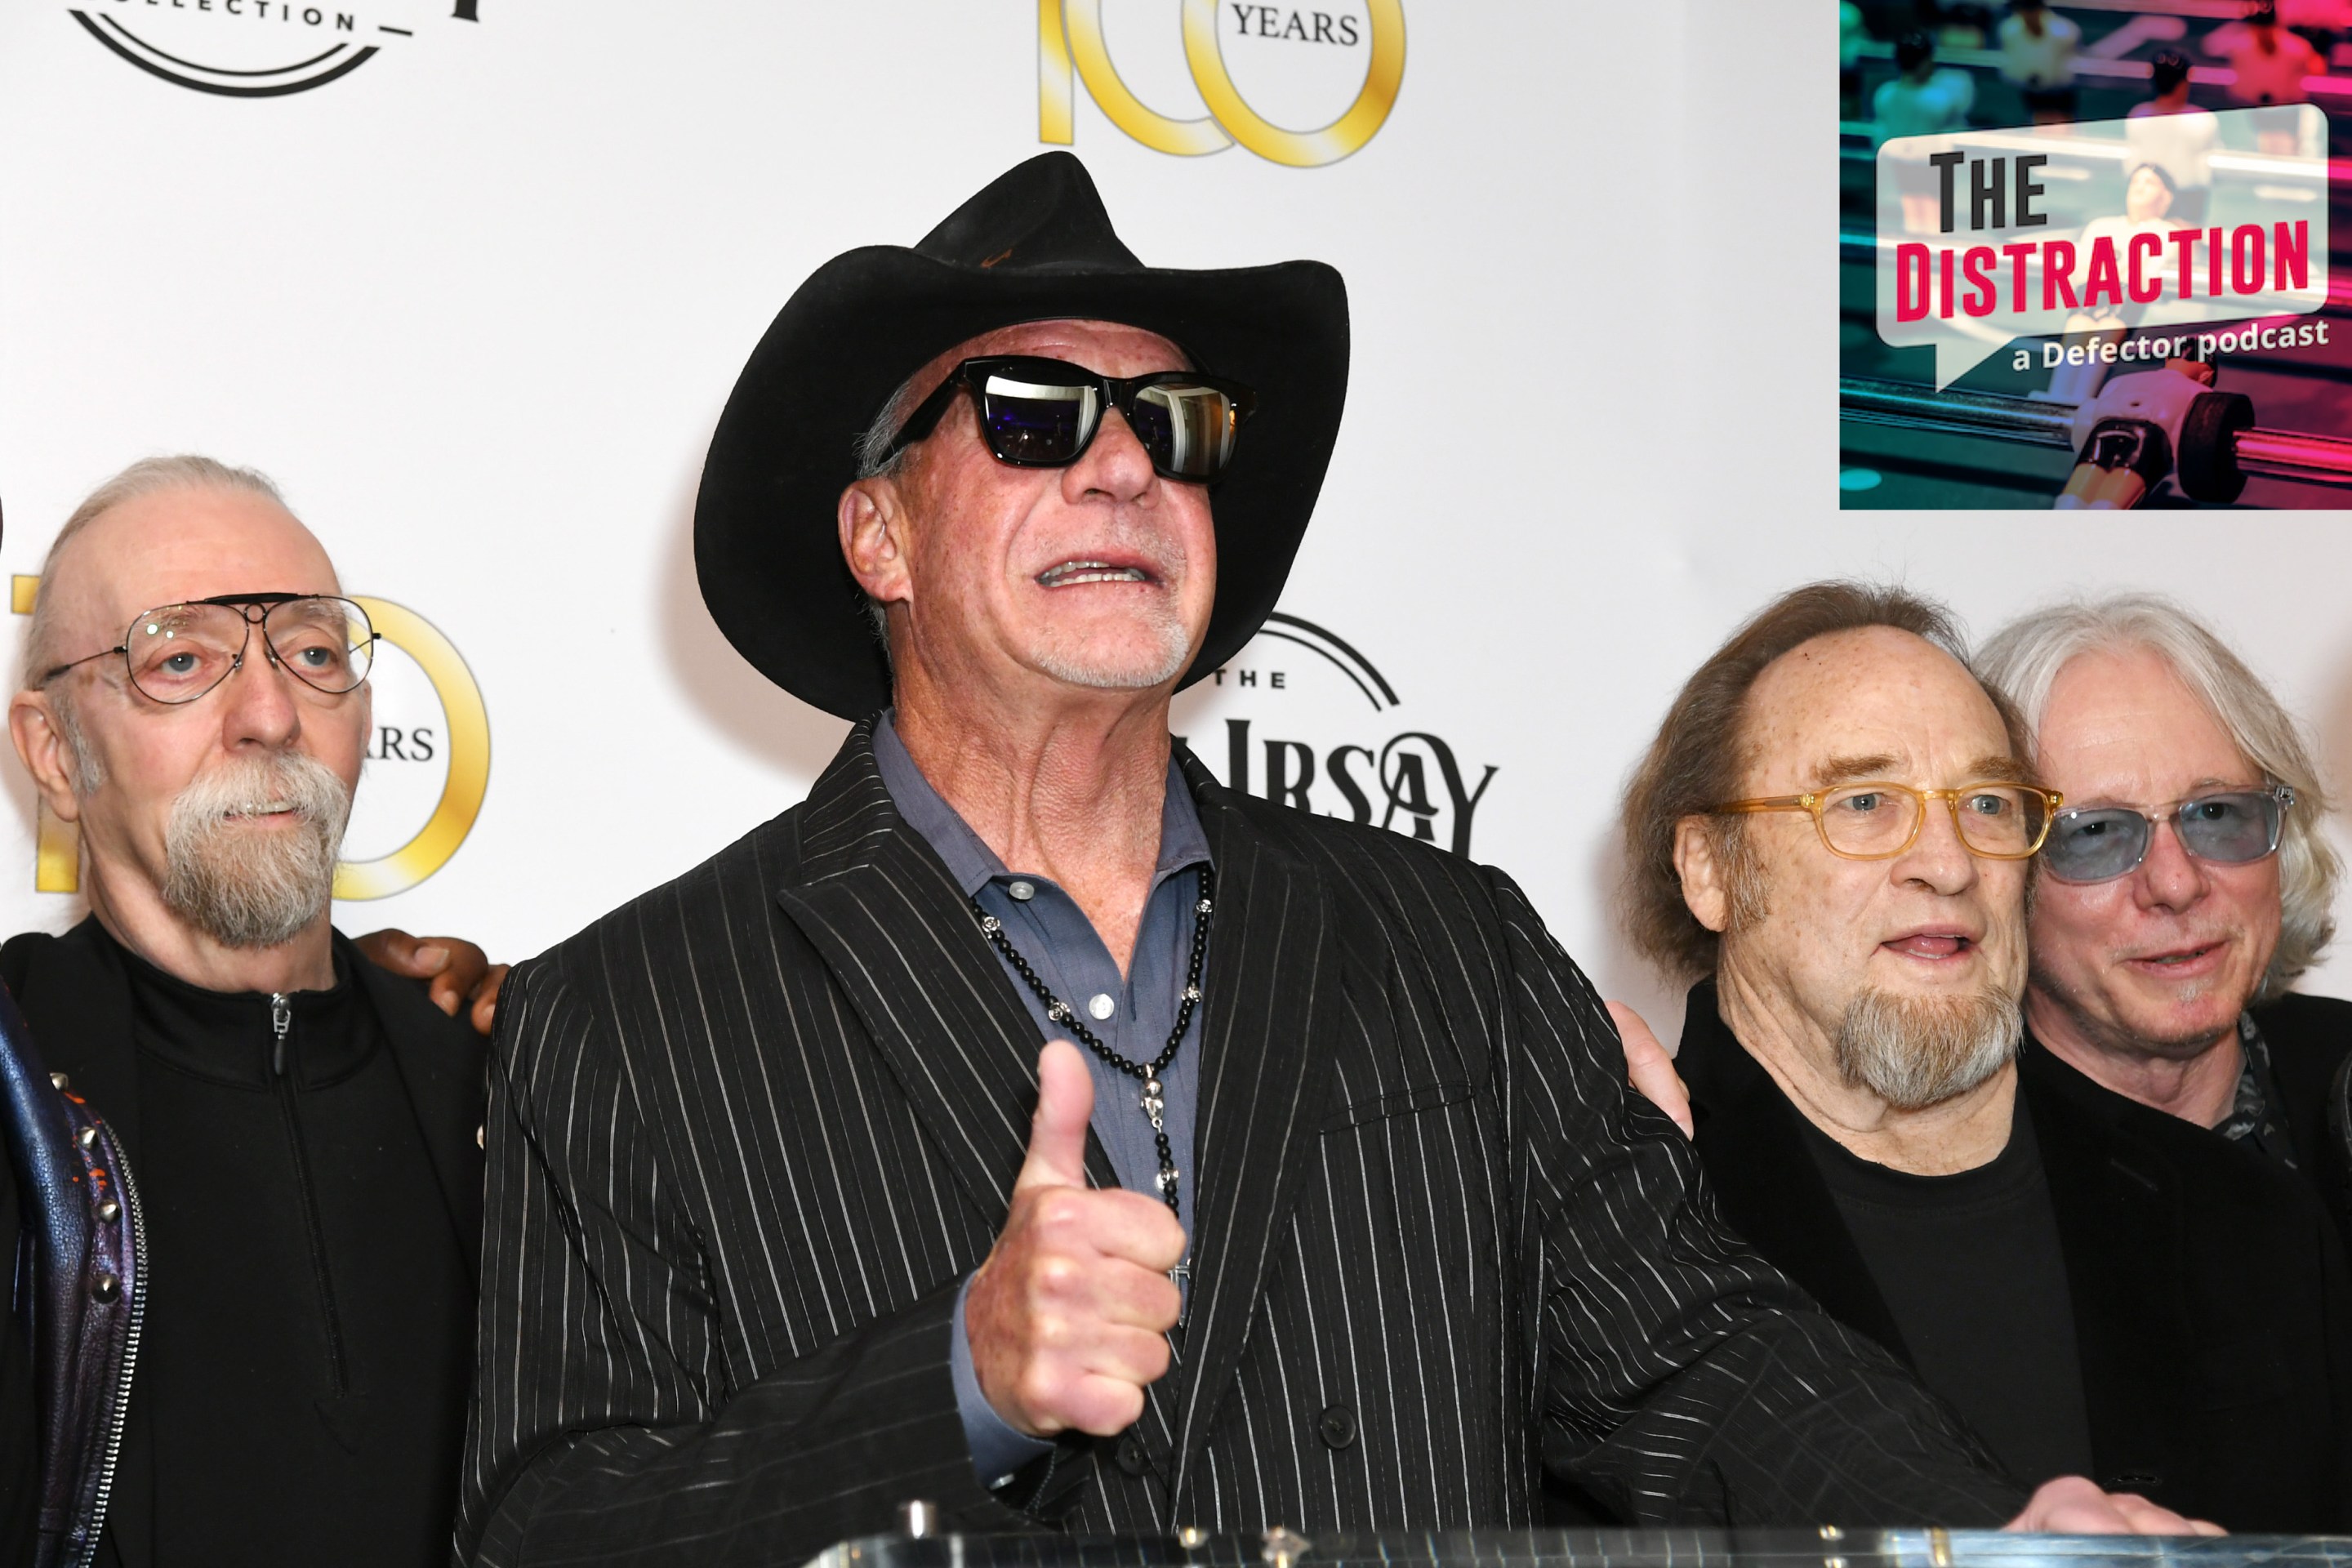 Colts owner Jim Irsay and various aged rock luminaries at the 100th birthday party for Jack Kerouac that Irsay hosted at the Beverly Hills Hotel.